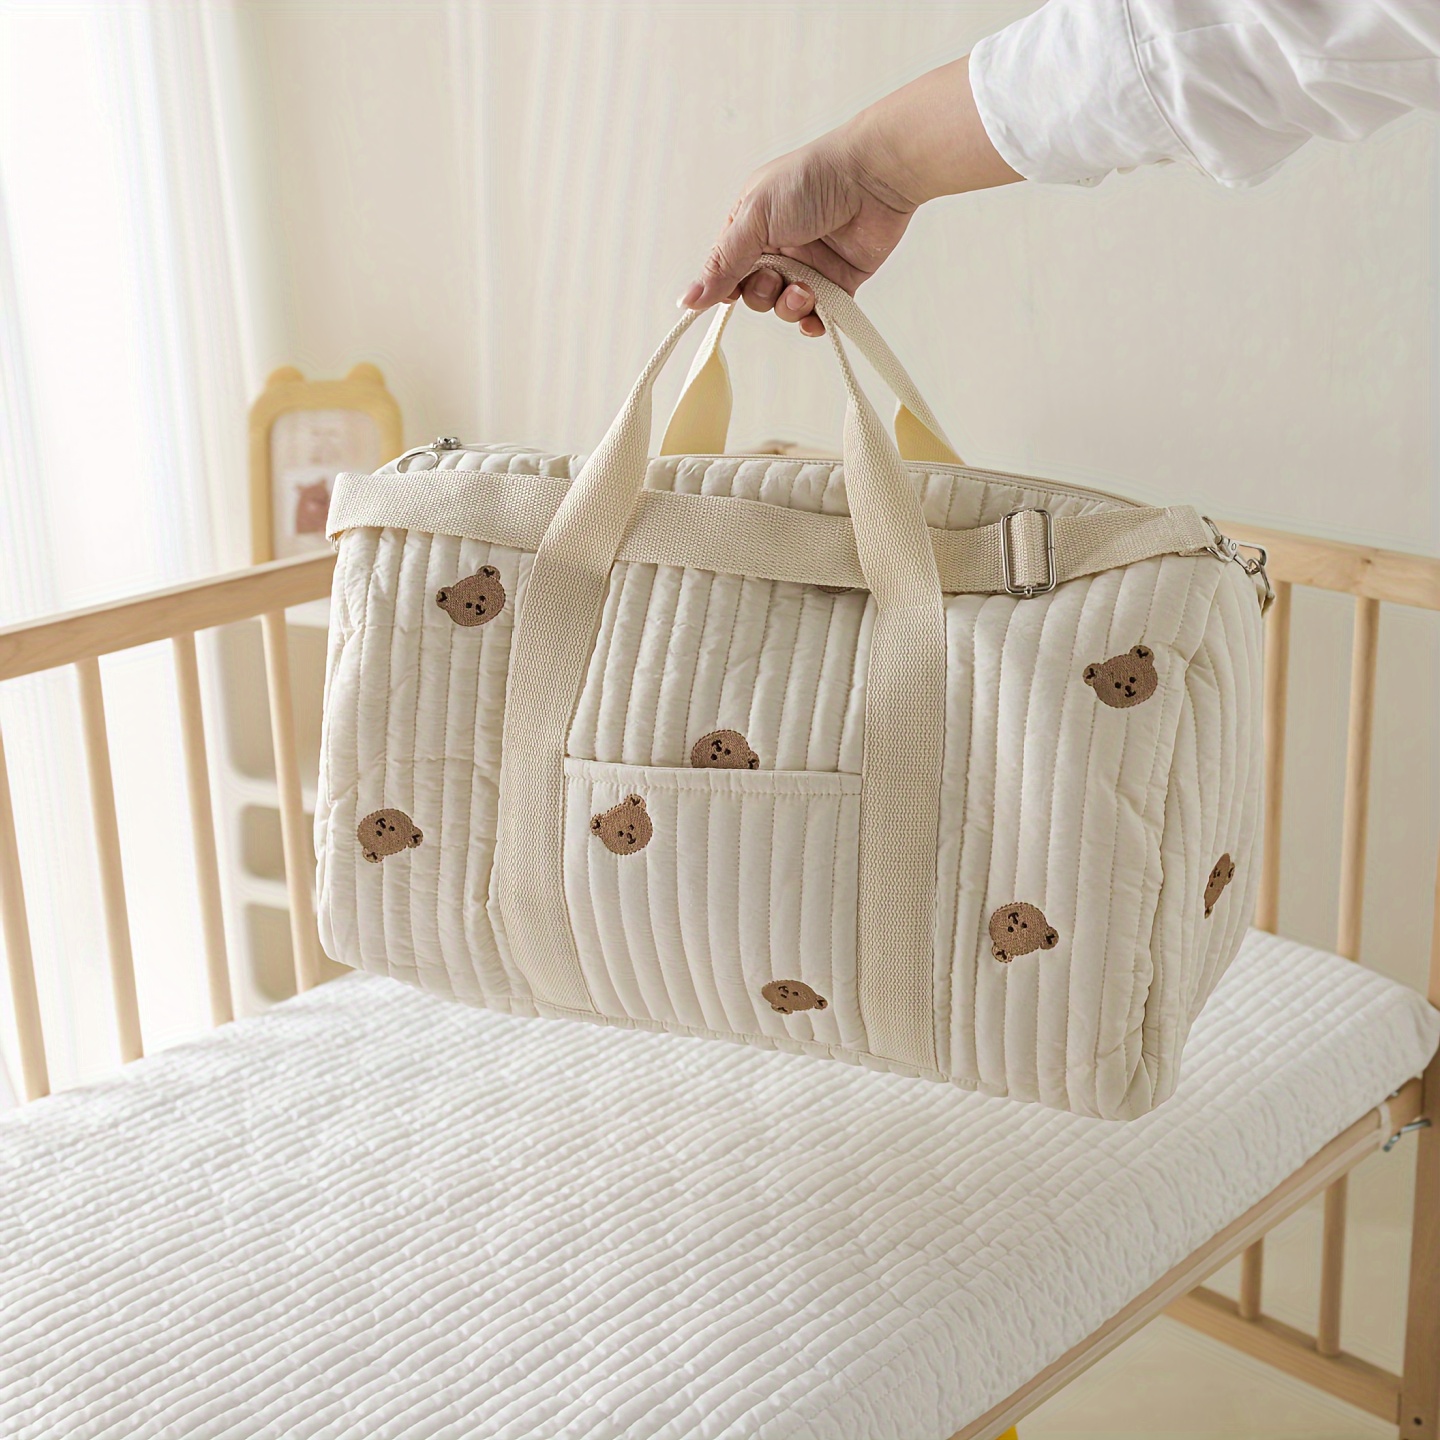 

Chic Embroidered Animal Print Parent Bag - Large Capacity, Durable Nylon, Perfect For Travel & Storage, Ages 0-3